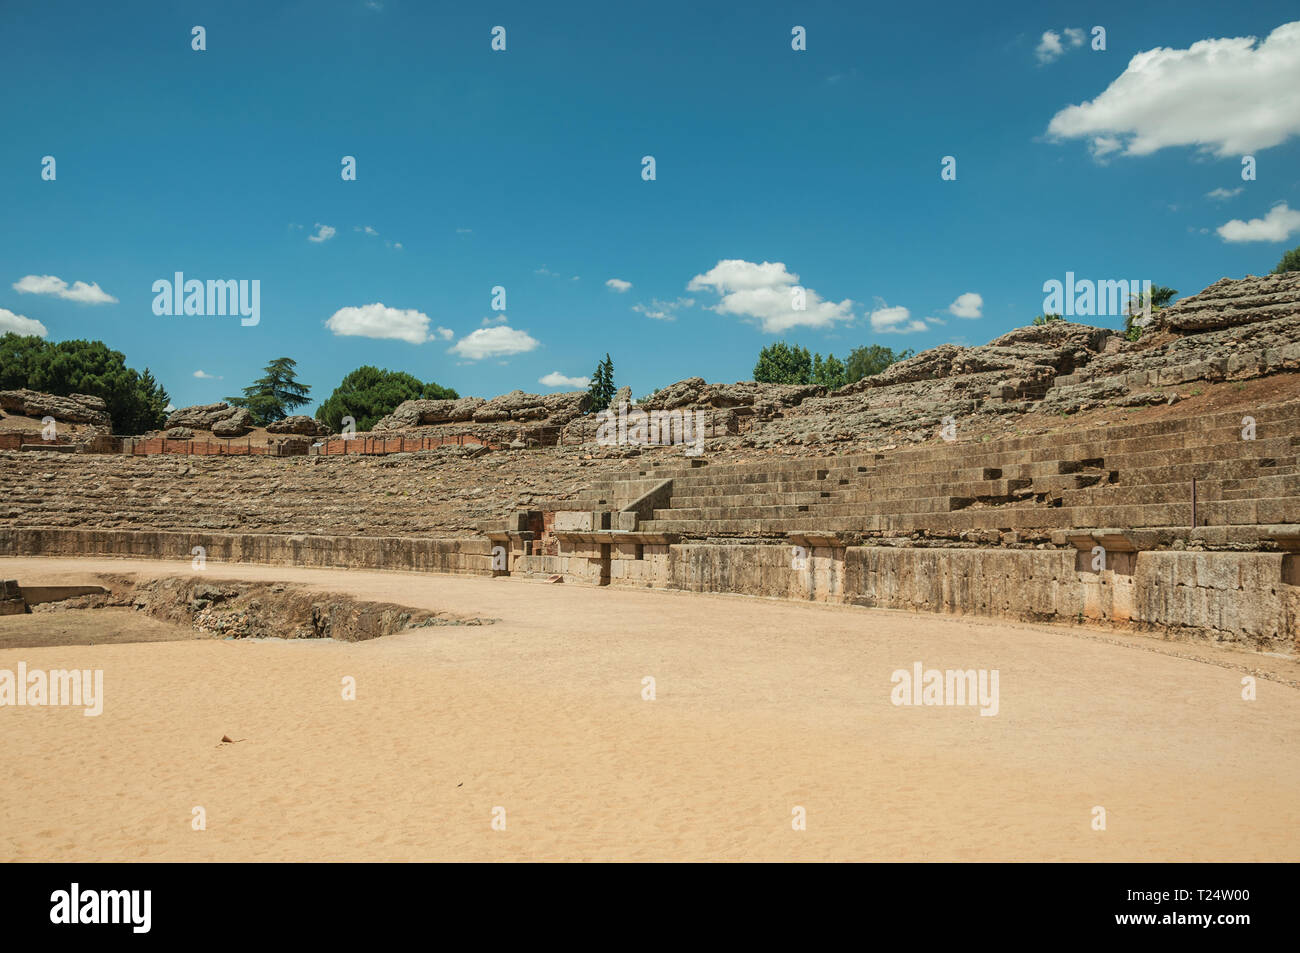 Stone bleachers and arena in the Roman Amphitheater at the archaeological site of Merida. The city preserves many buildings of ancient Rome in Spain. Stock Photo